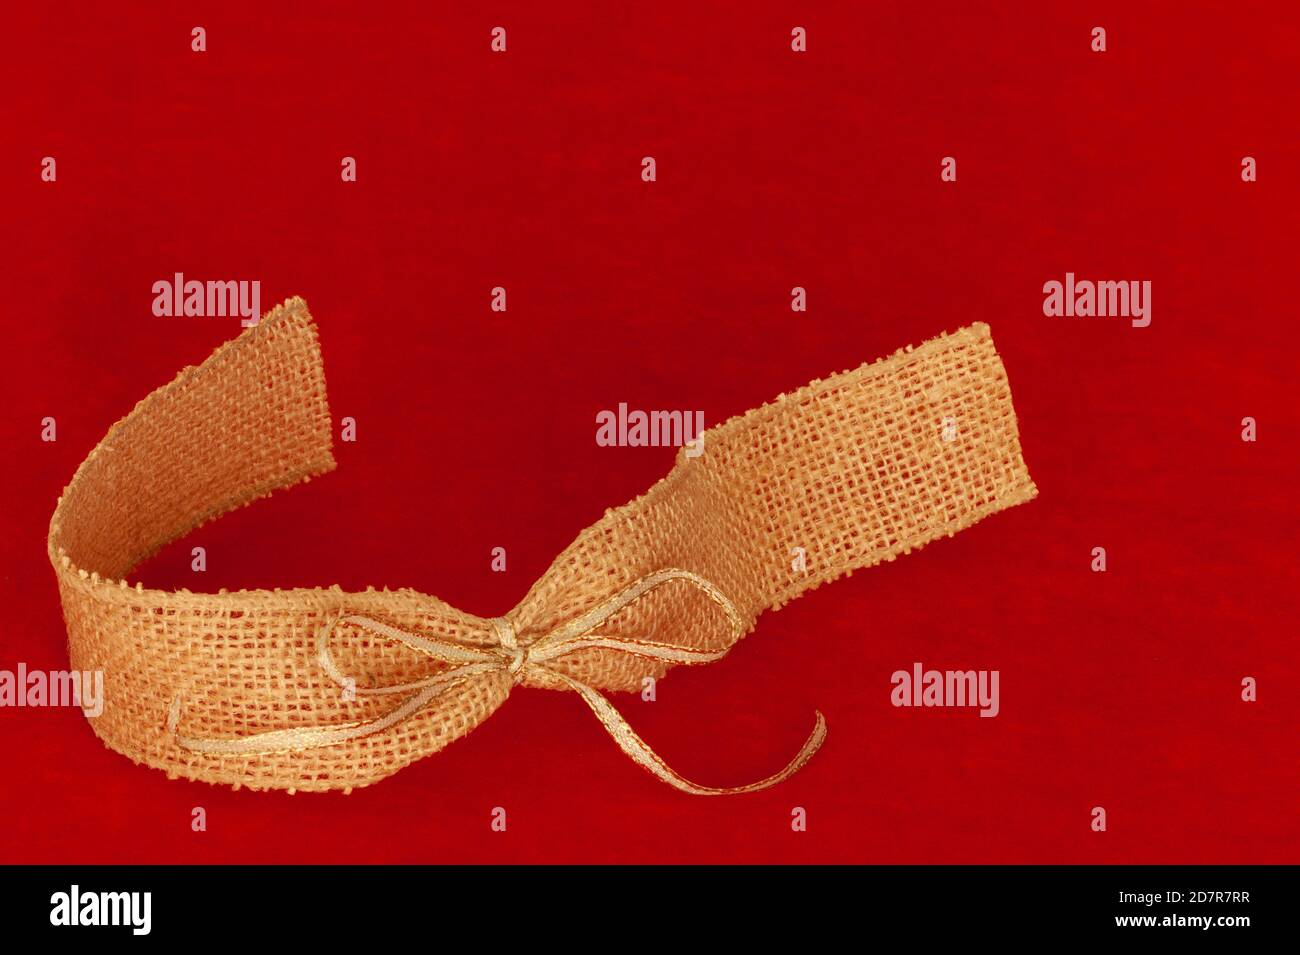 Gold and beige ribbon and bow on red fabric background with text space for message. Stock Photo